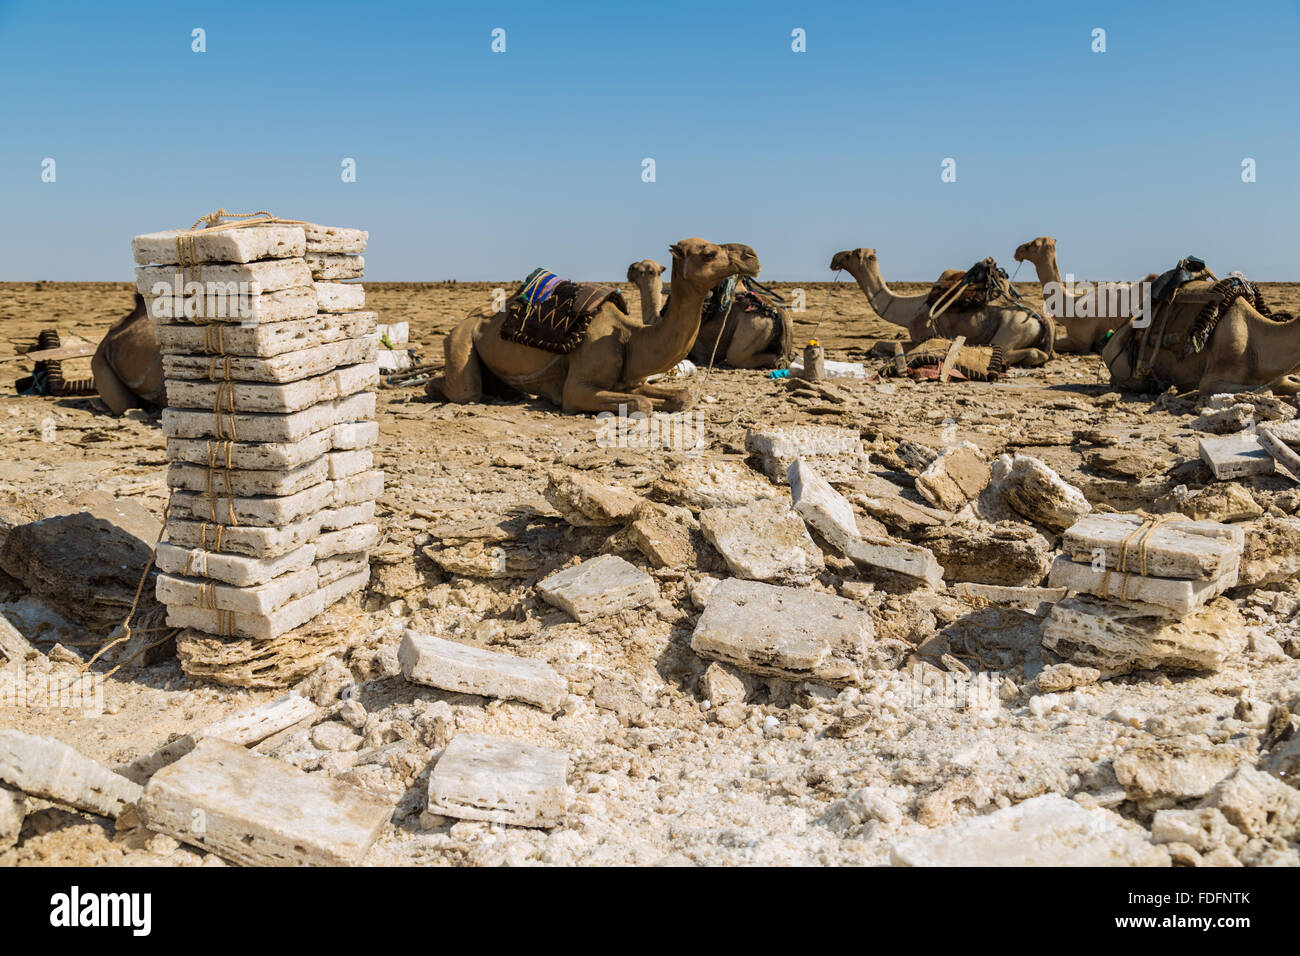 Evenly-cut salt slabs await loading onto camels in the Dallol, Ethiopia Stock Photo